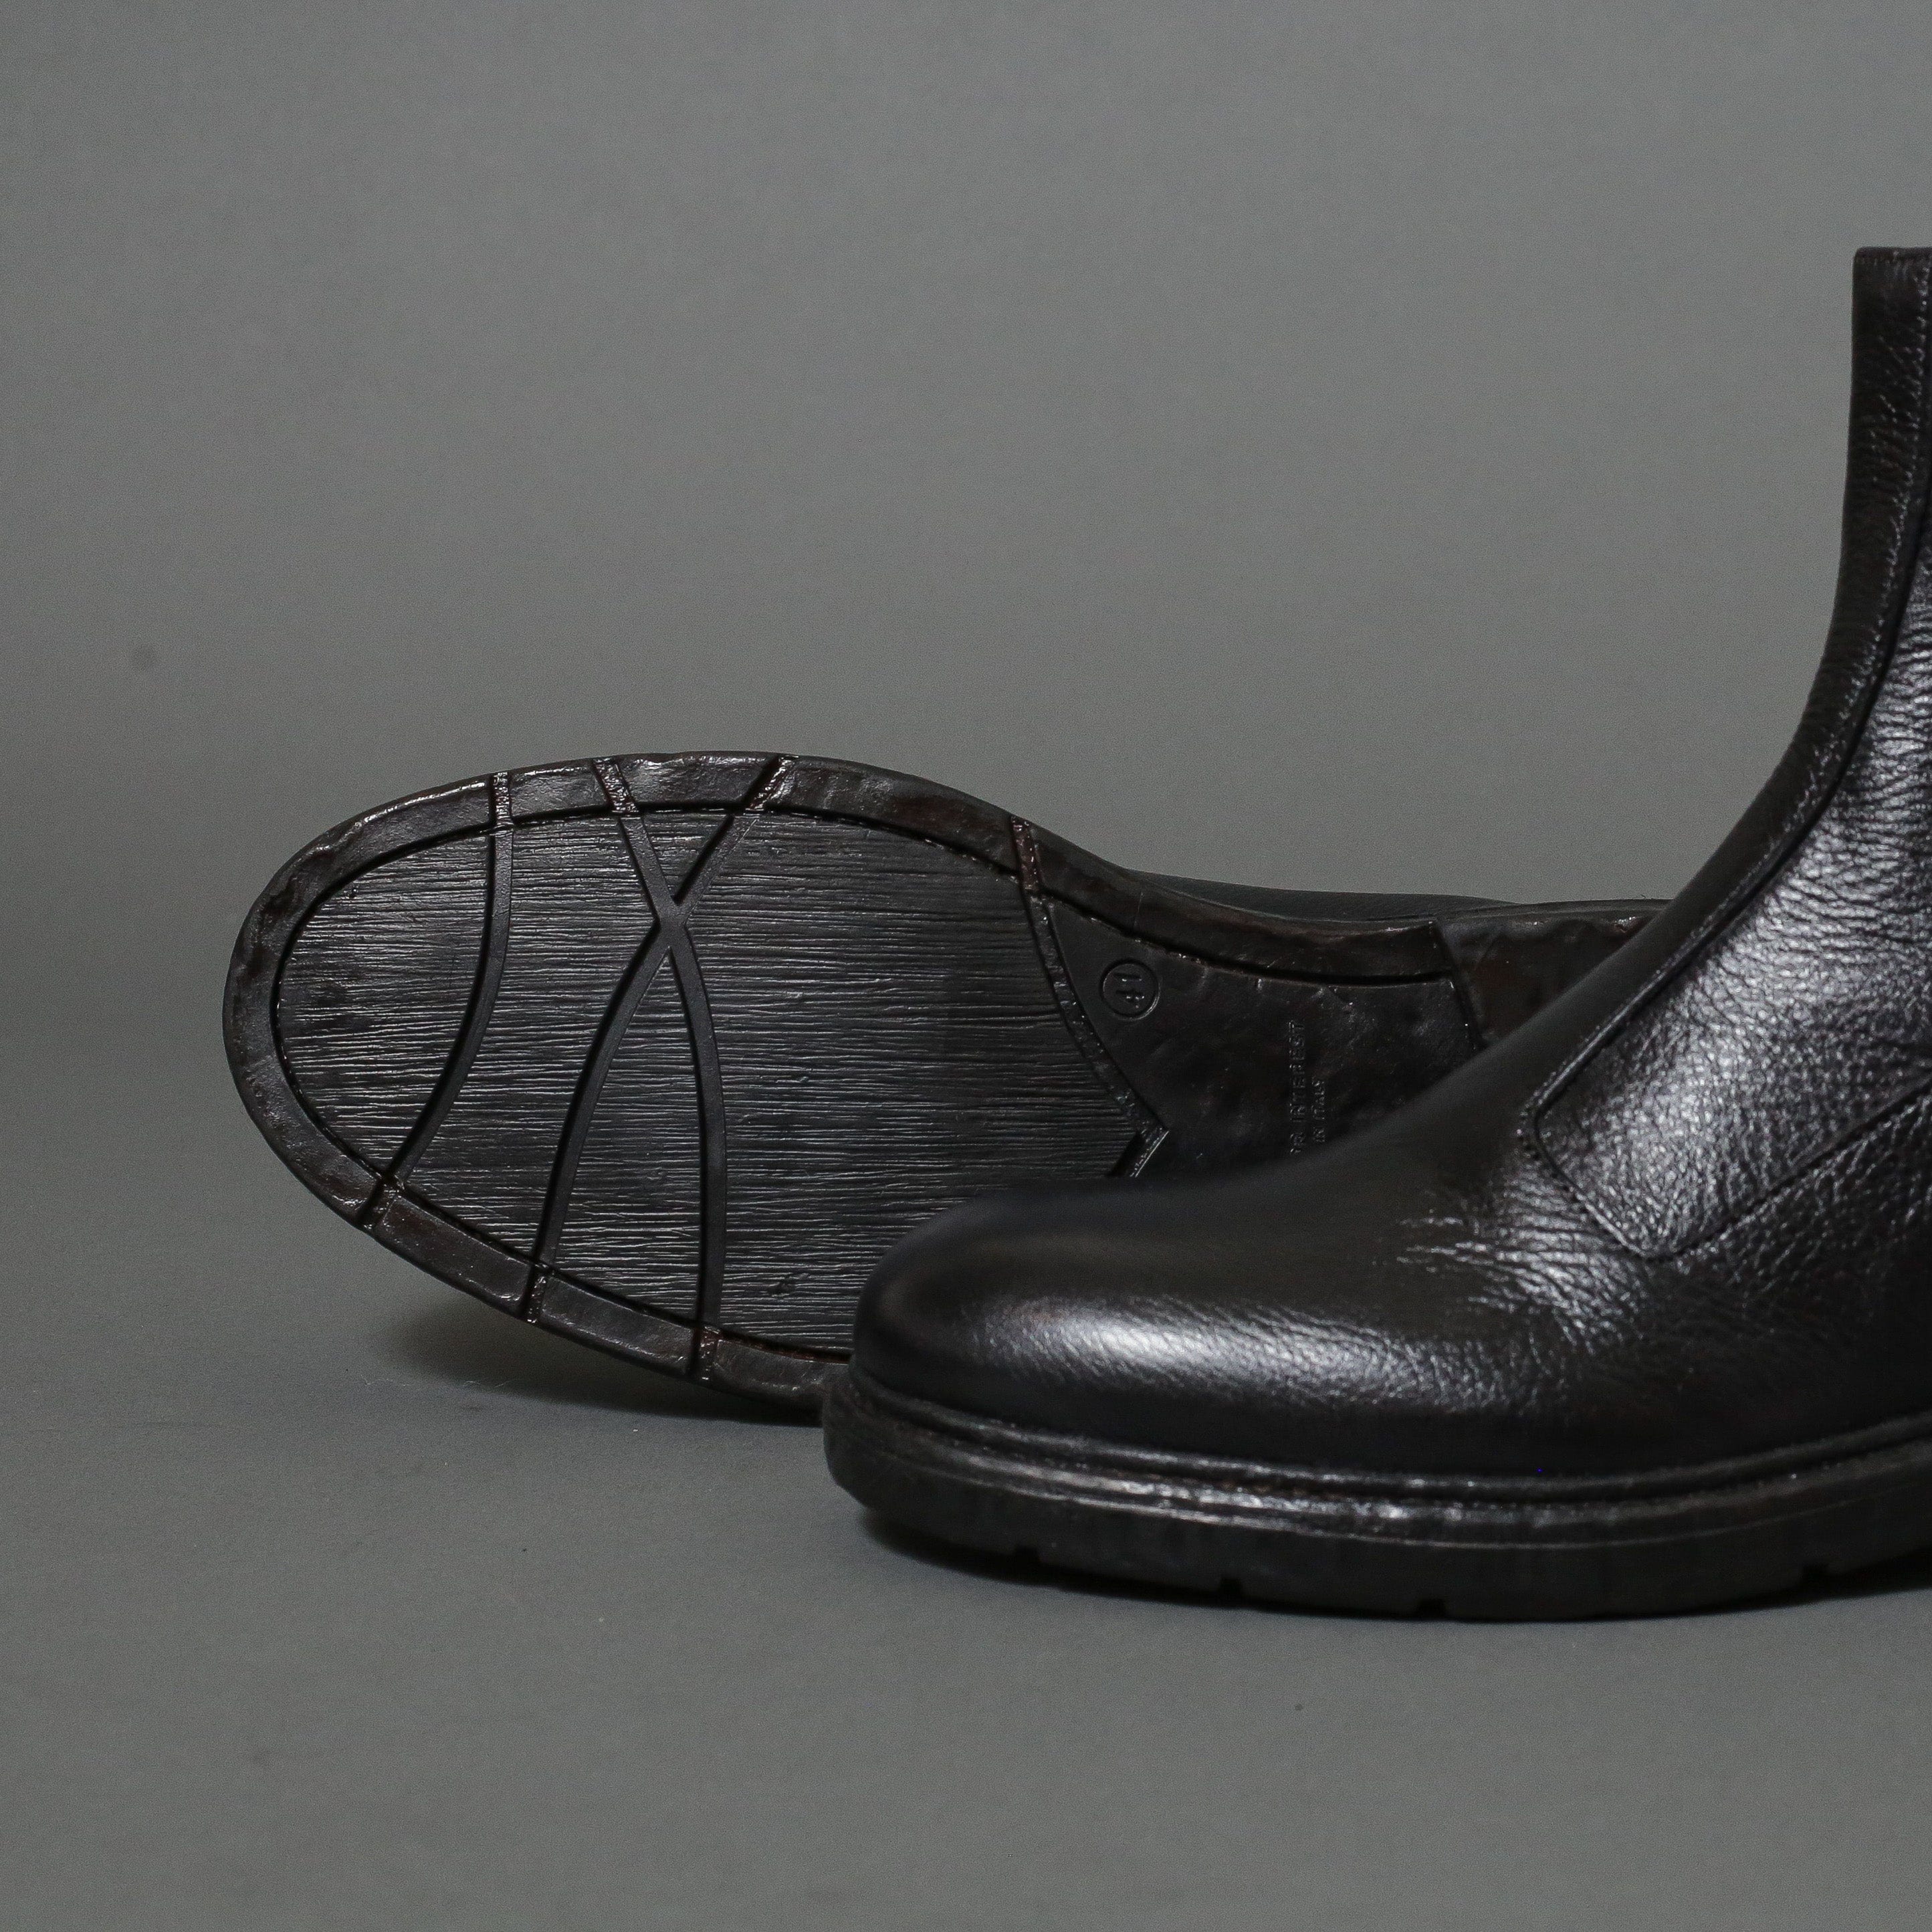 Conflict For Interest Chelsea Boot Conflict For Interest 380 Black